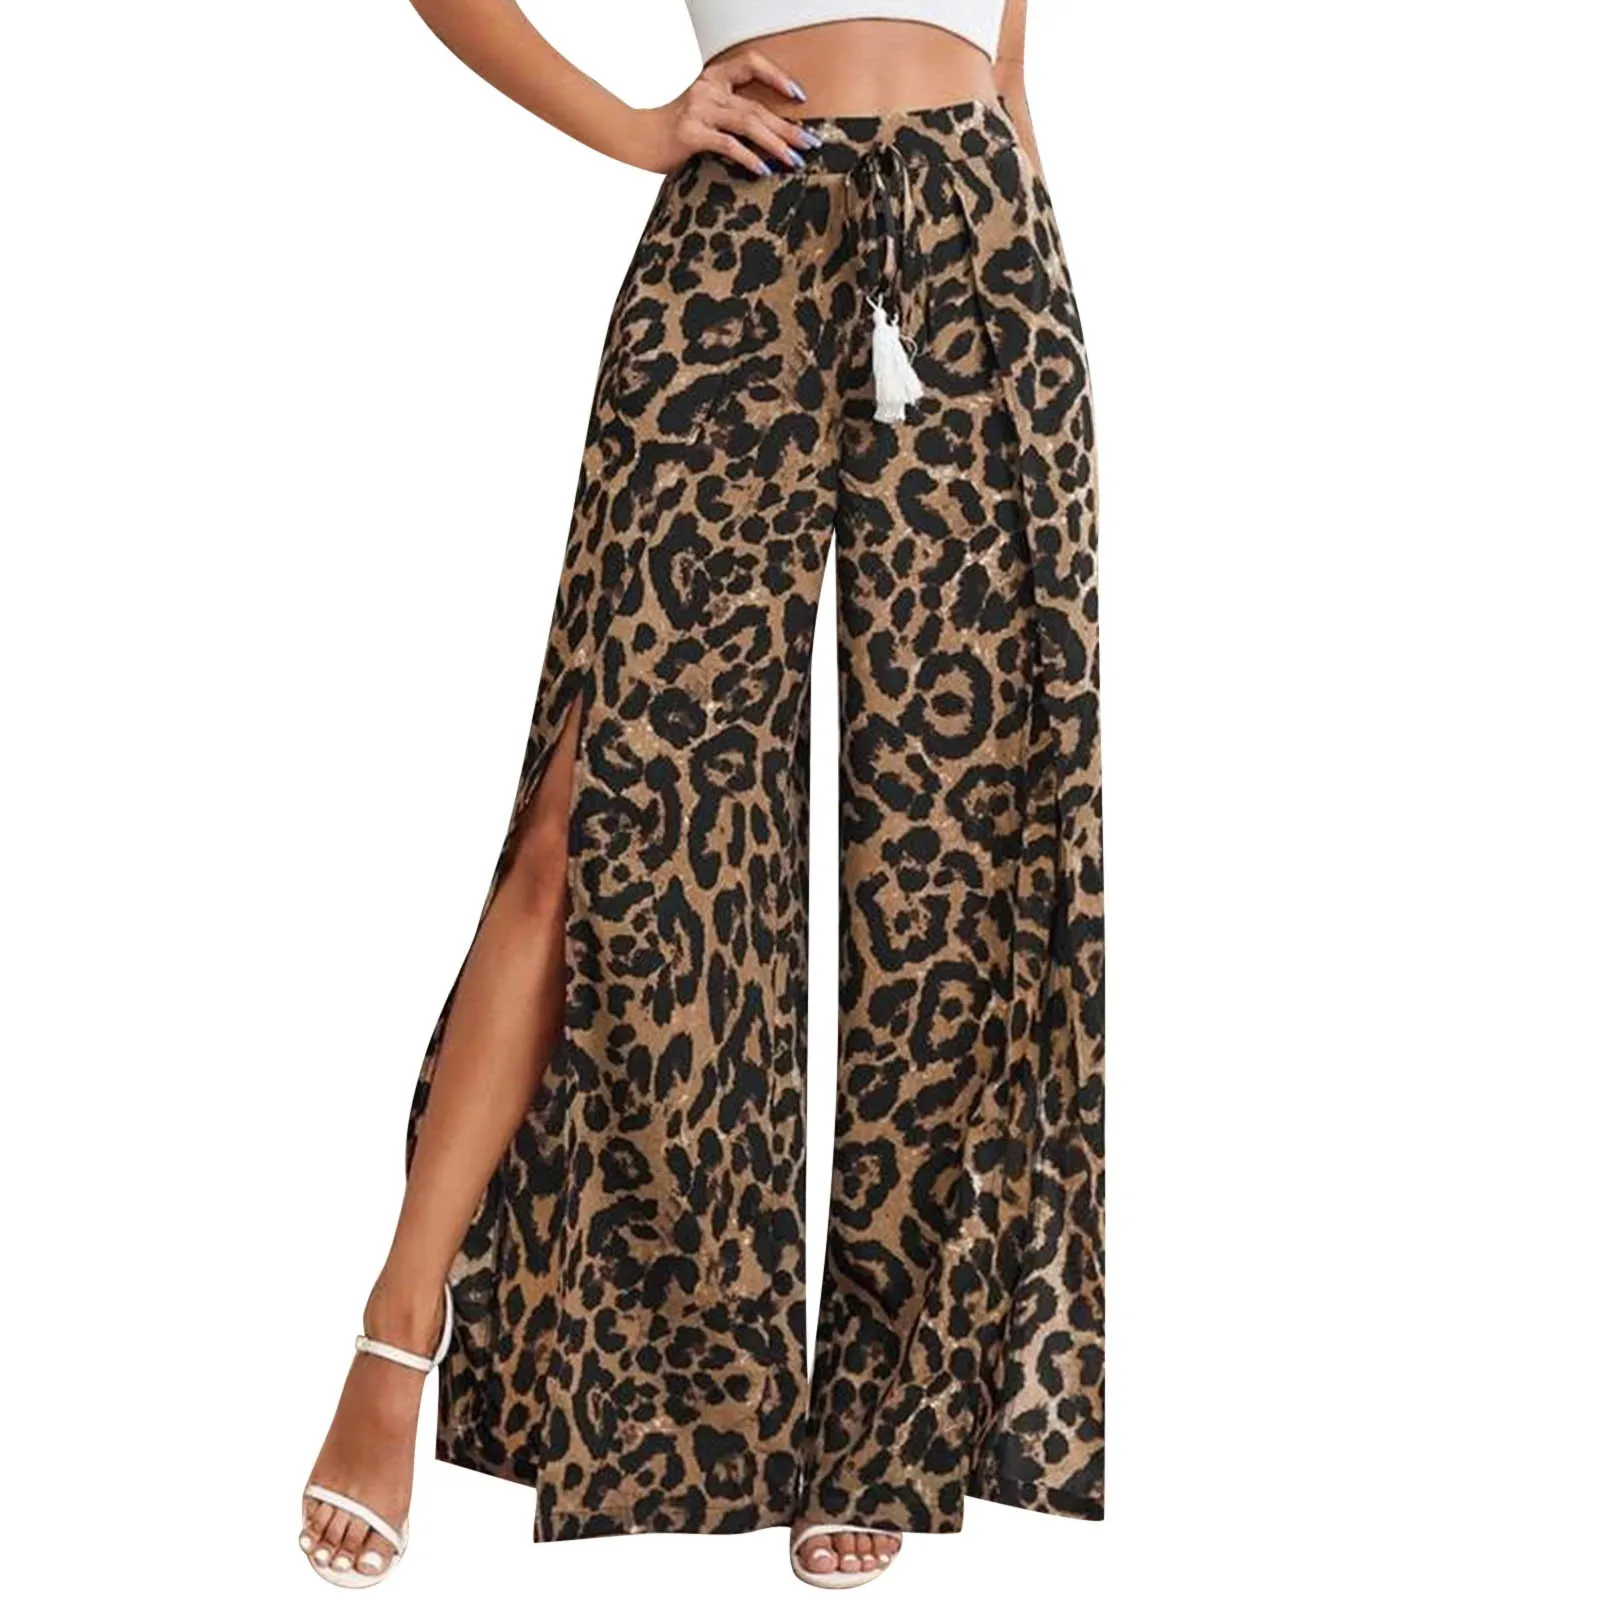 

Women'S Vintage Trend Pants Leopard Print Casual Tassel Lace Up Waist Printes Wide Leg High Waisted Trousers Women Dropshipping